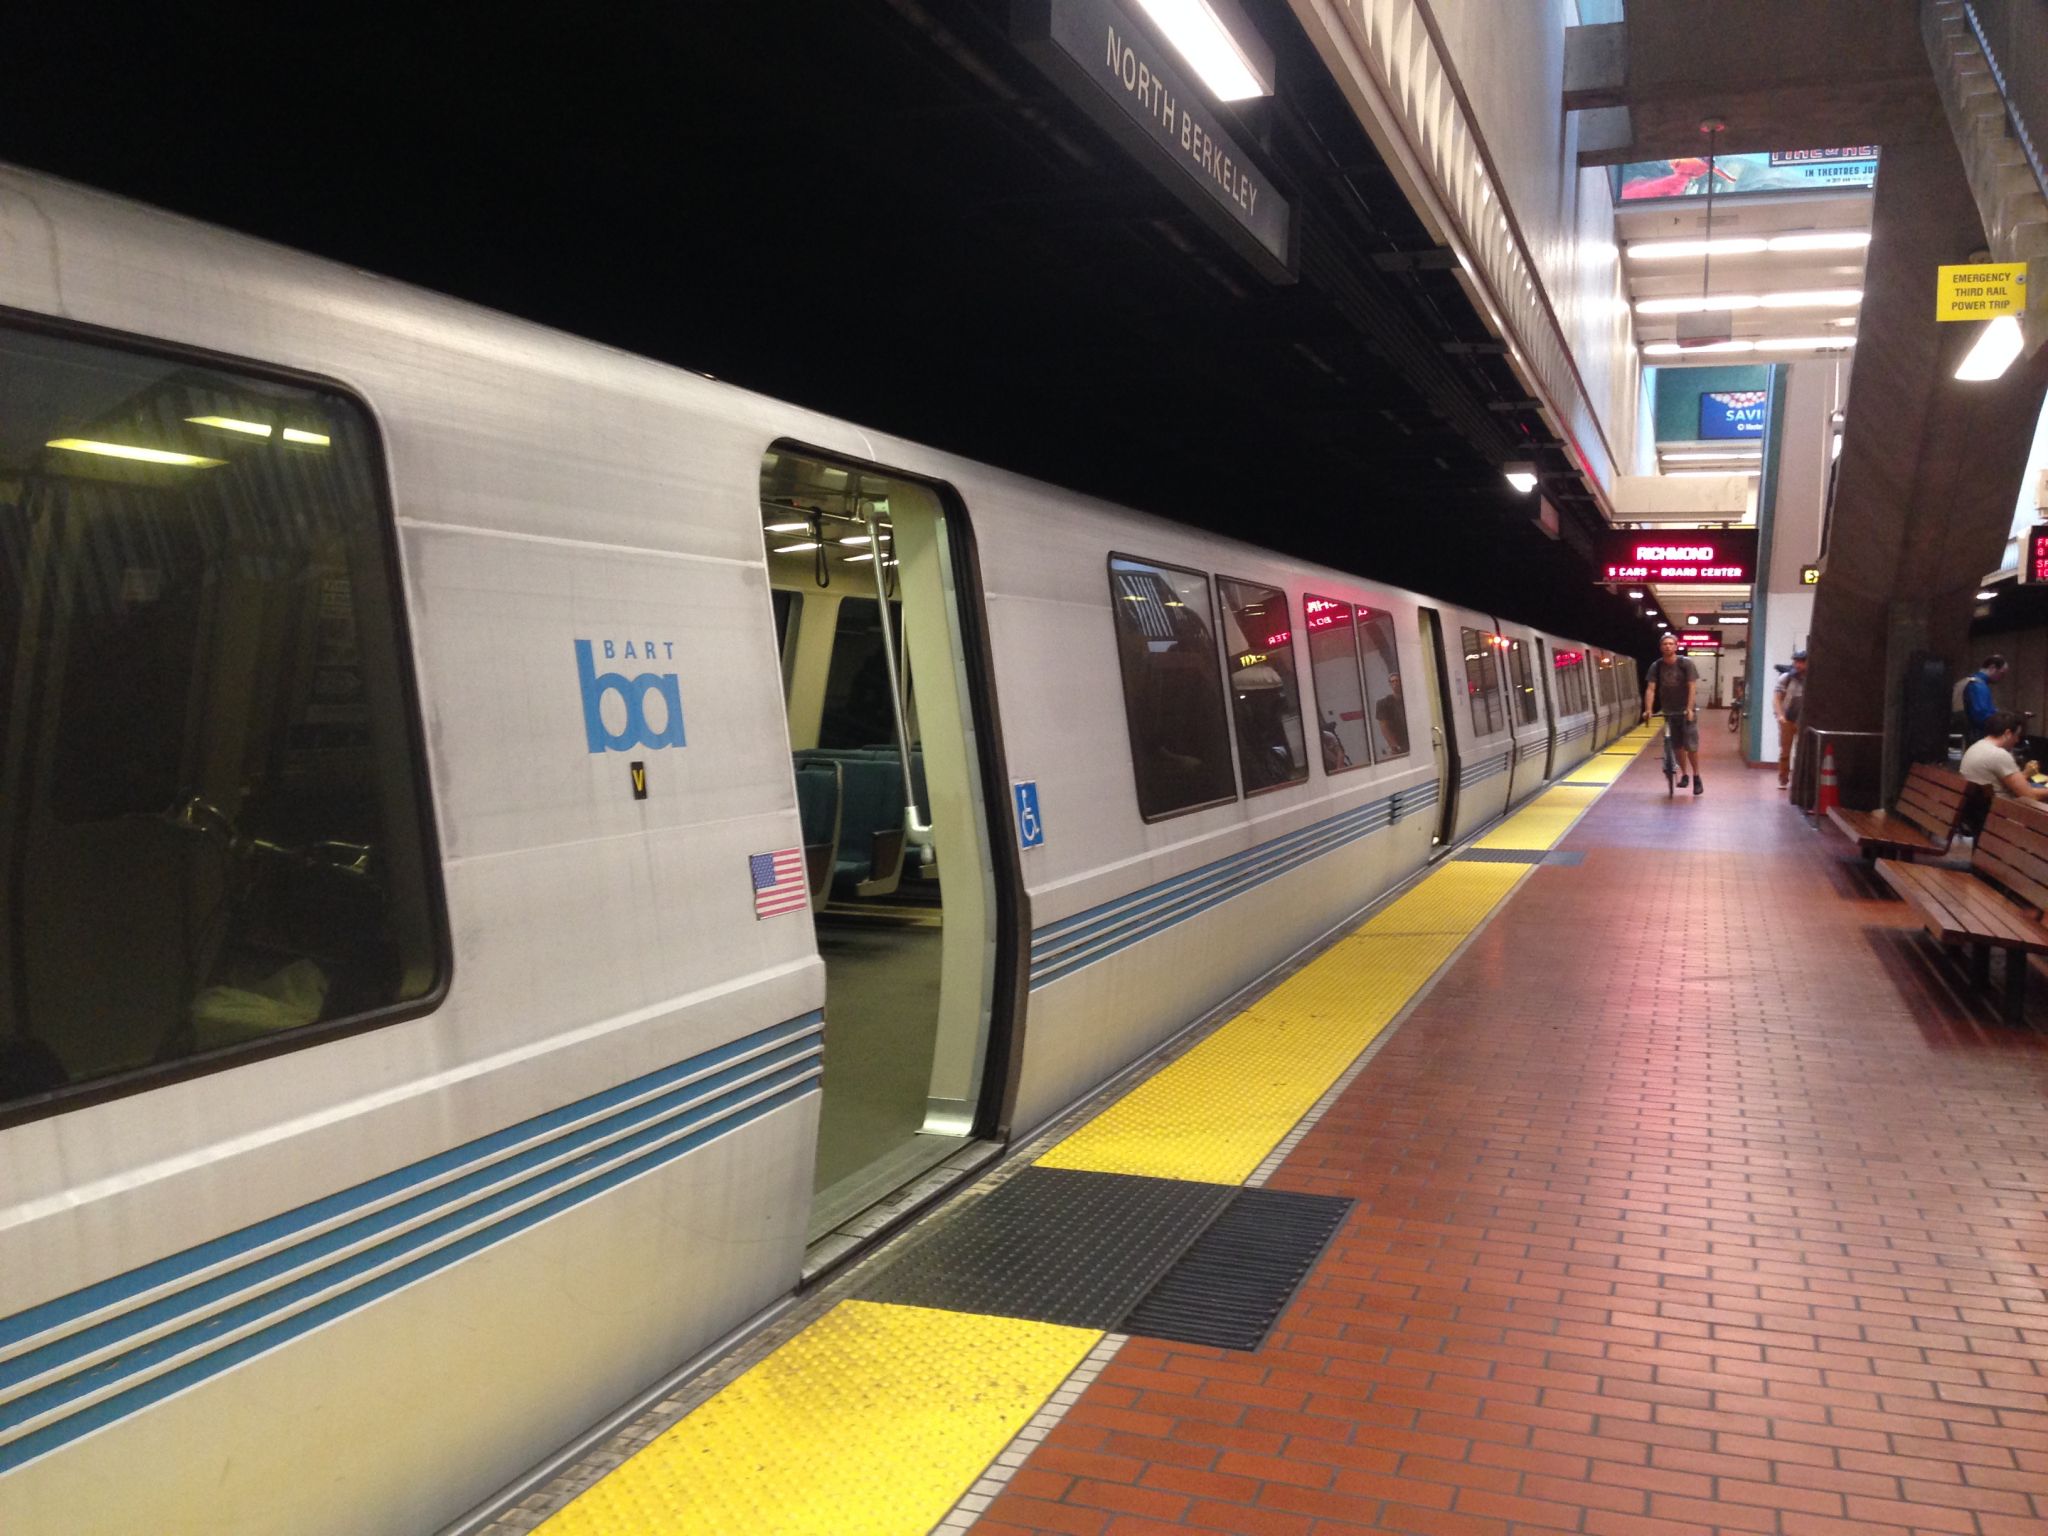 All BART stations are closed until further notice due to a system-wide computer problem